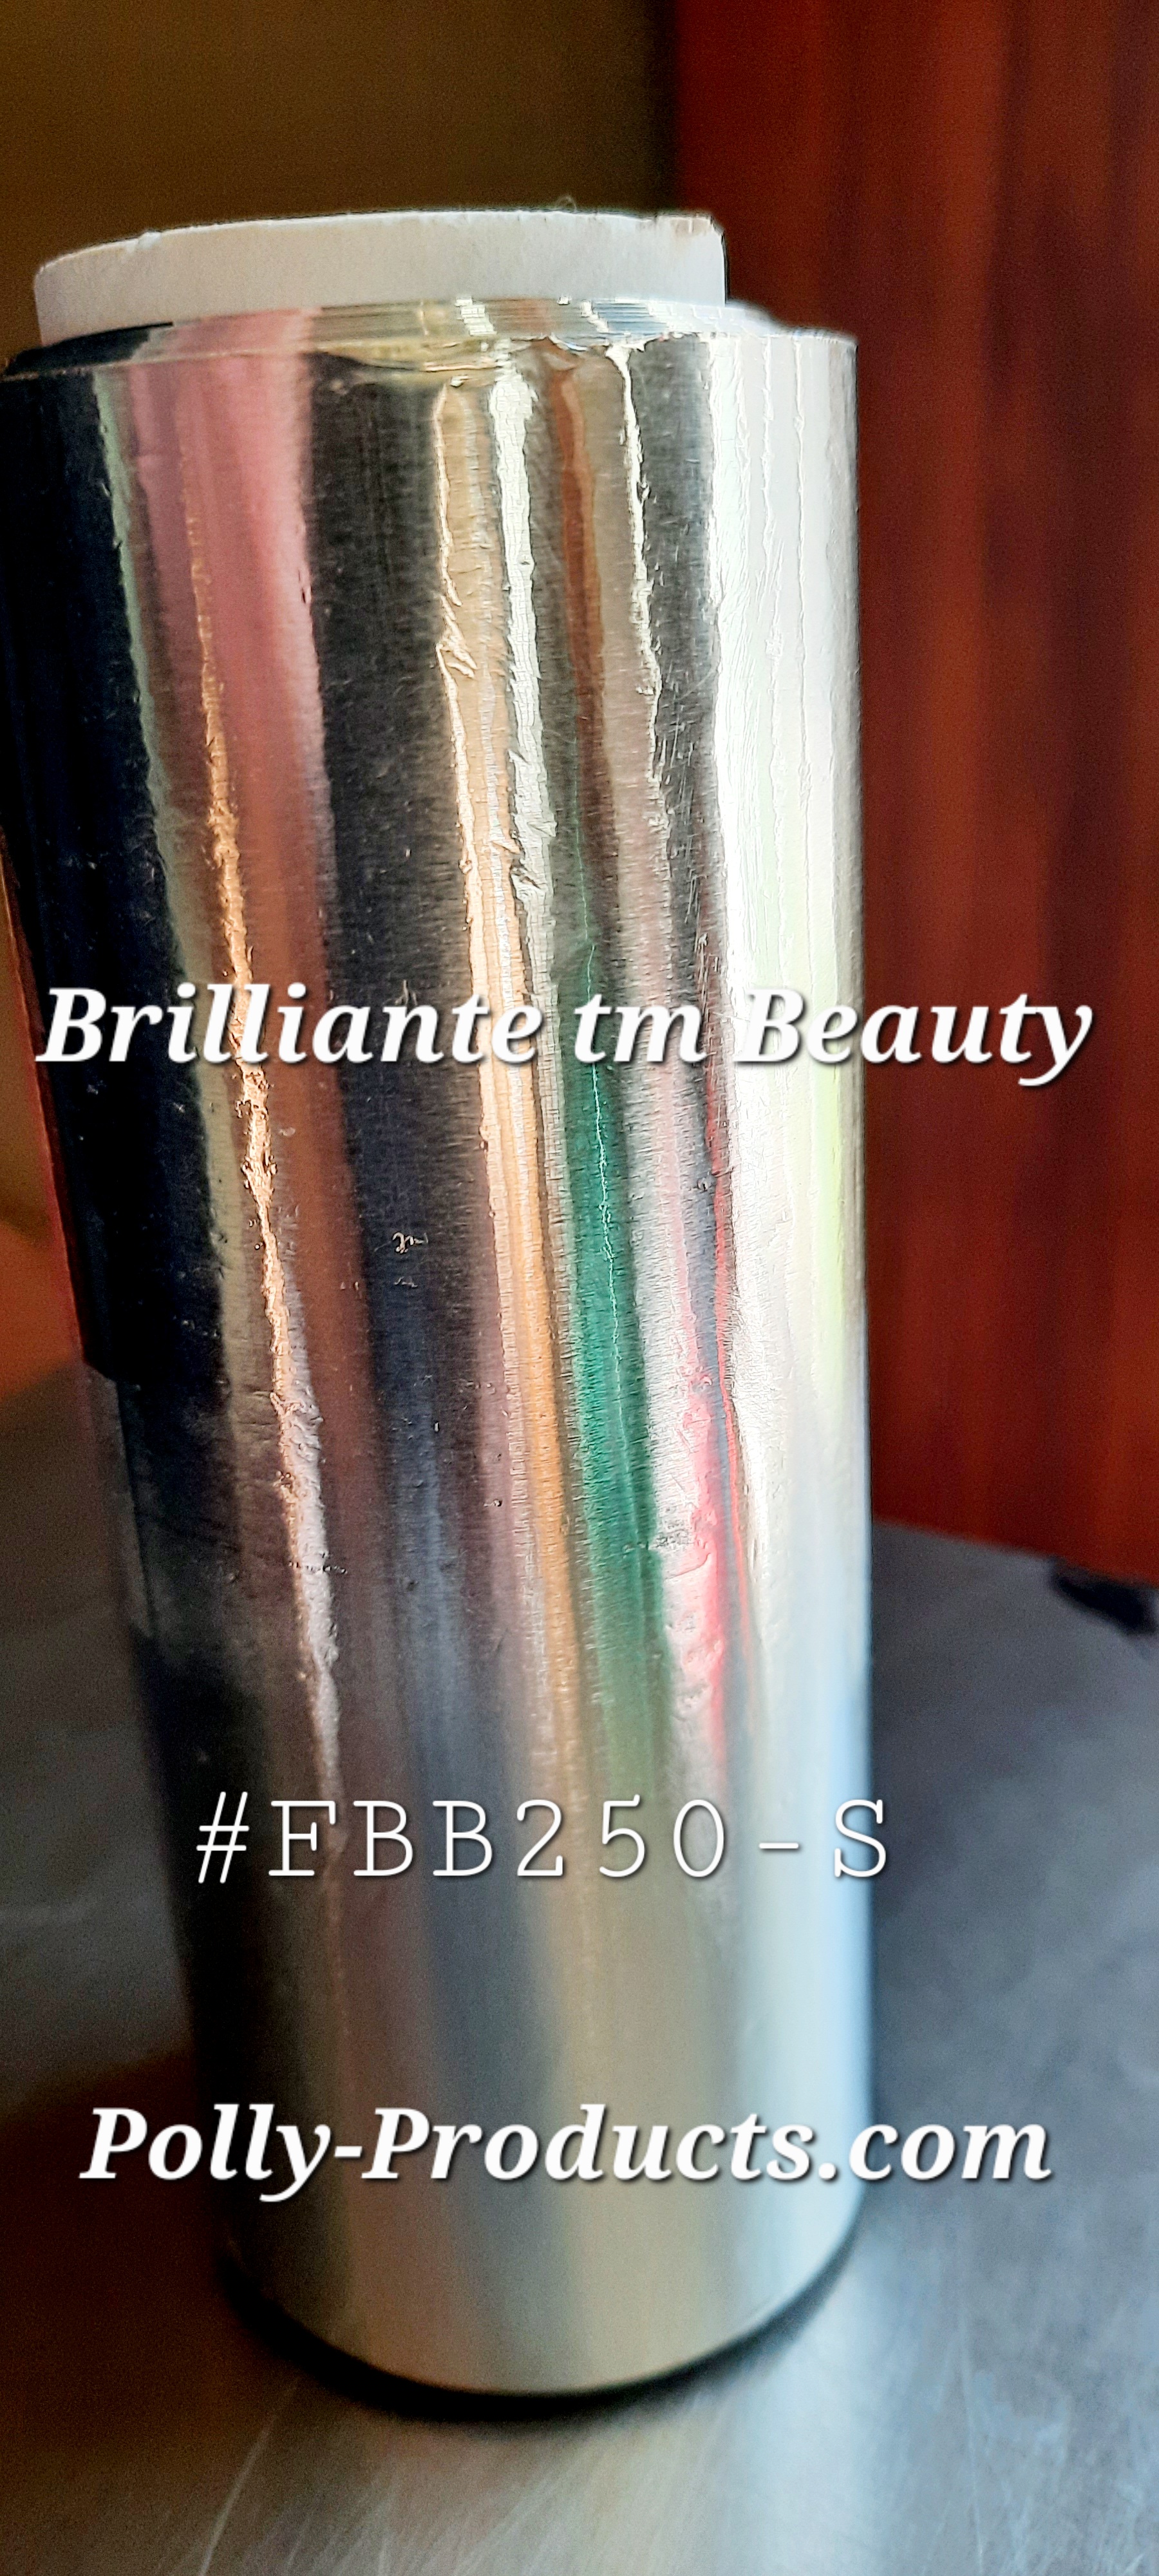 #FBB250-S HAIR COLOR FOIL FROM POLLY PRODUCTS/ BRILLIANTE tm BEAUTY 250 ' x 5"